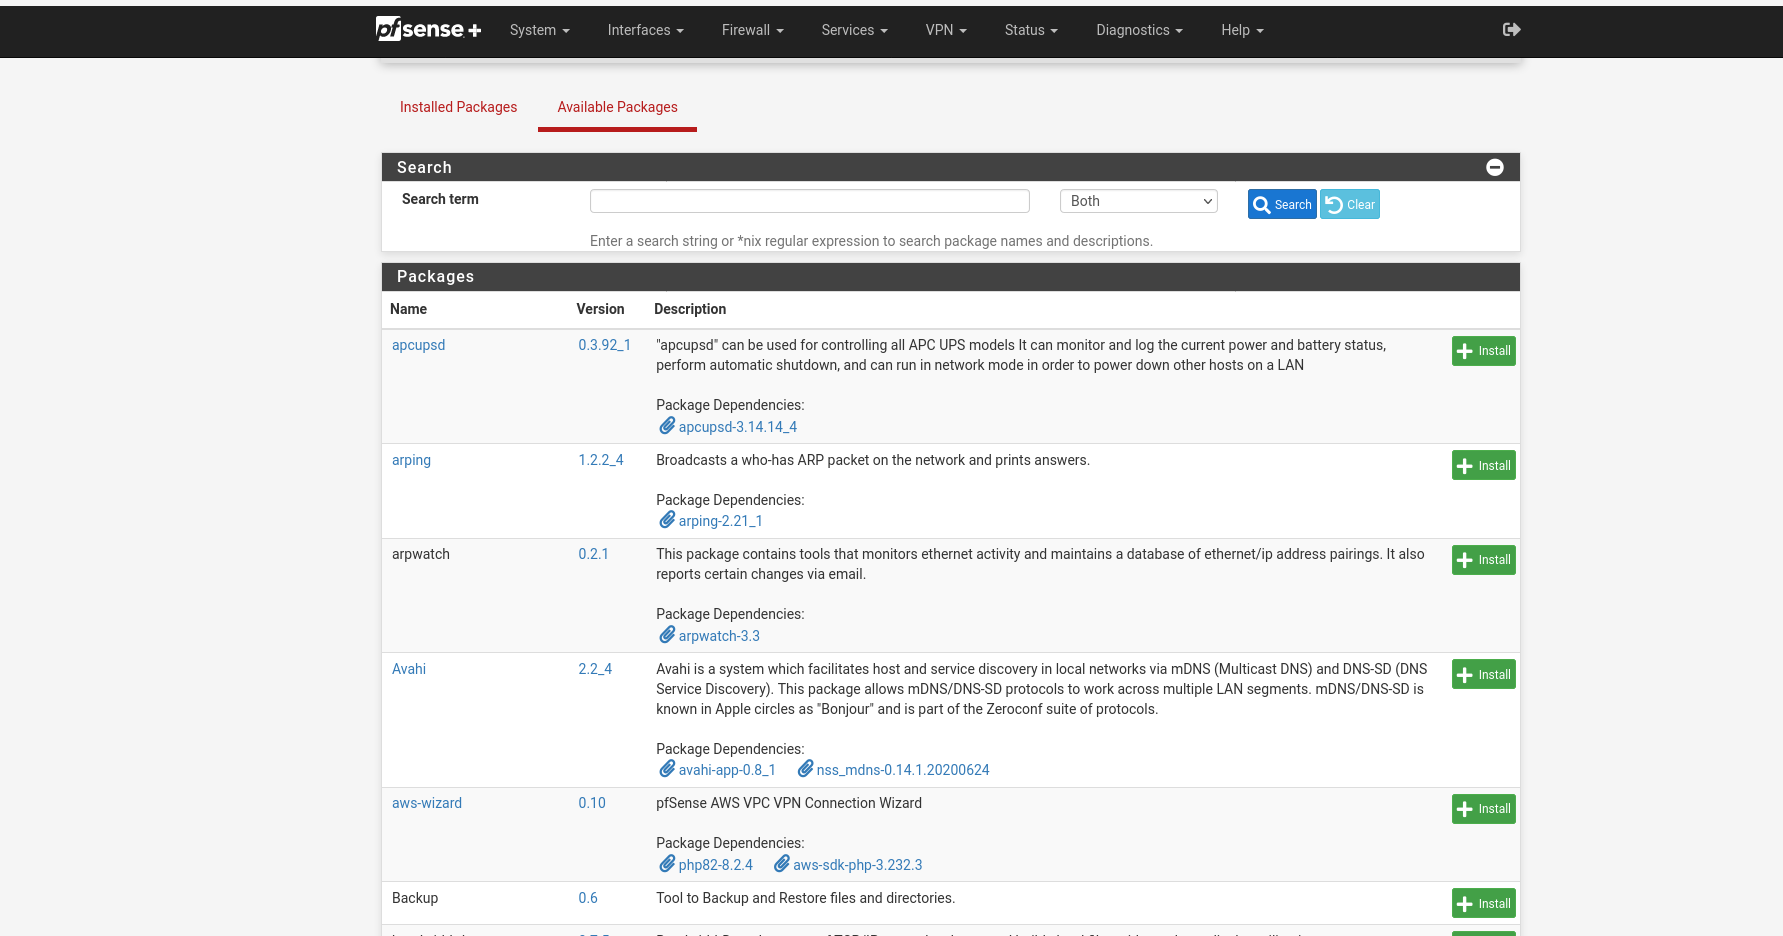 Screenshot 2023-05-23 at 19-53-27 pfSense.home.arpa - System Package Manager Available Packages.png